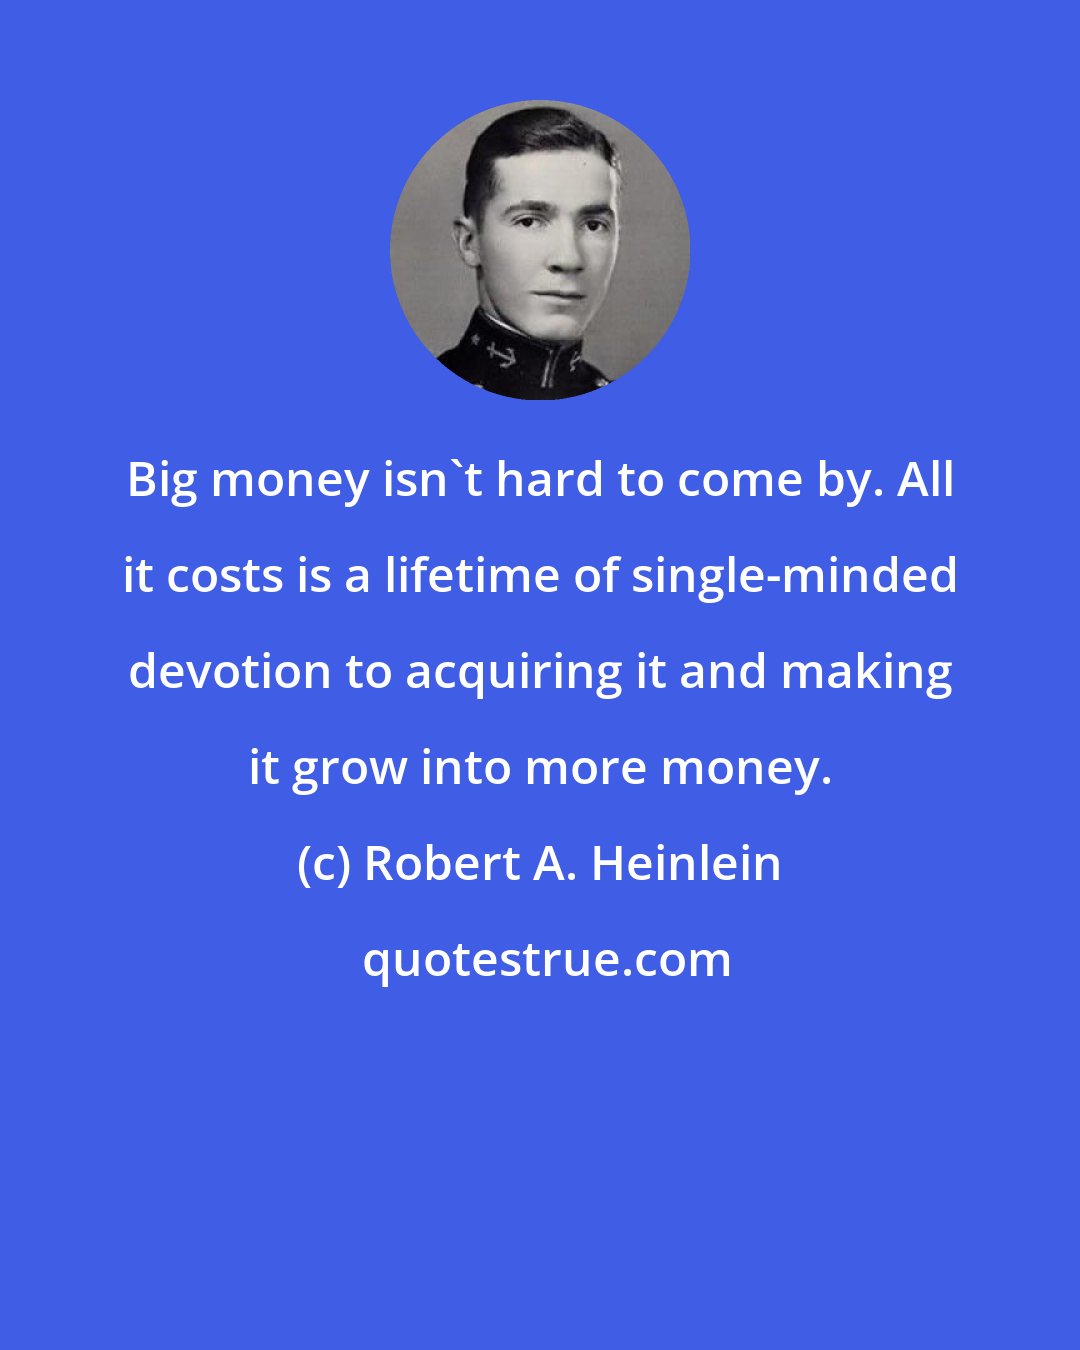 Robert A. Heinlein: Big money isn't hard to come by. All it costs is a lifetime of single-minded devotion to acquiring it and making it grow into more money.